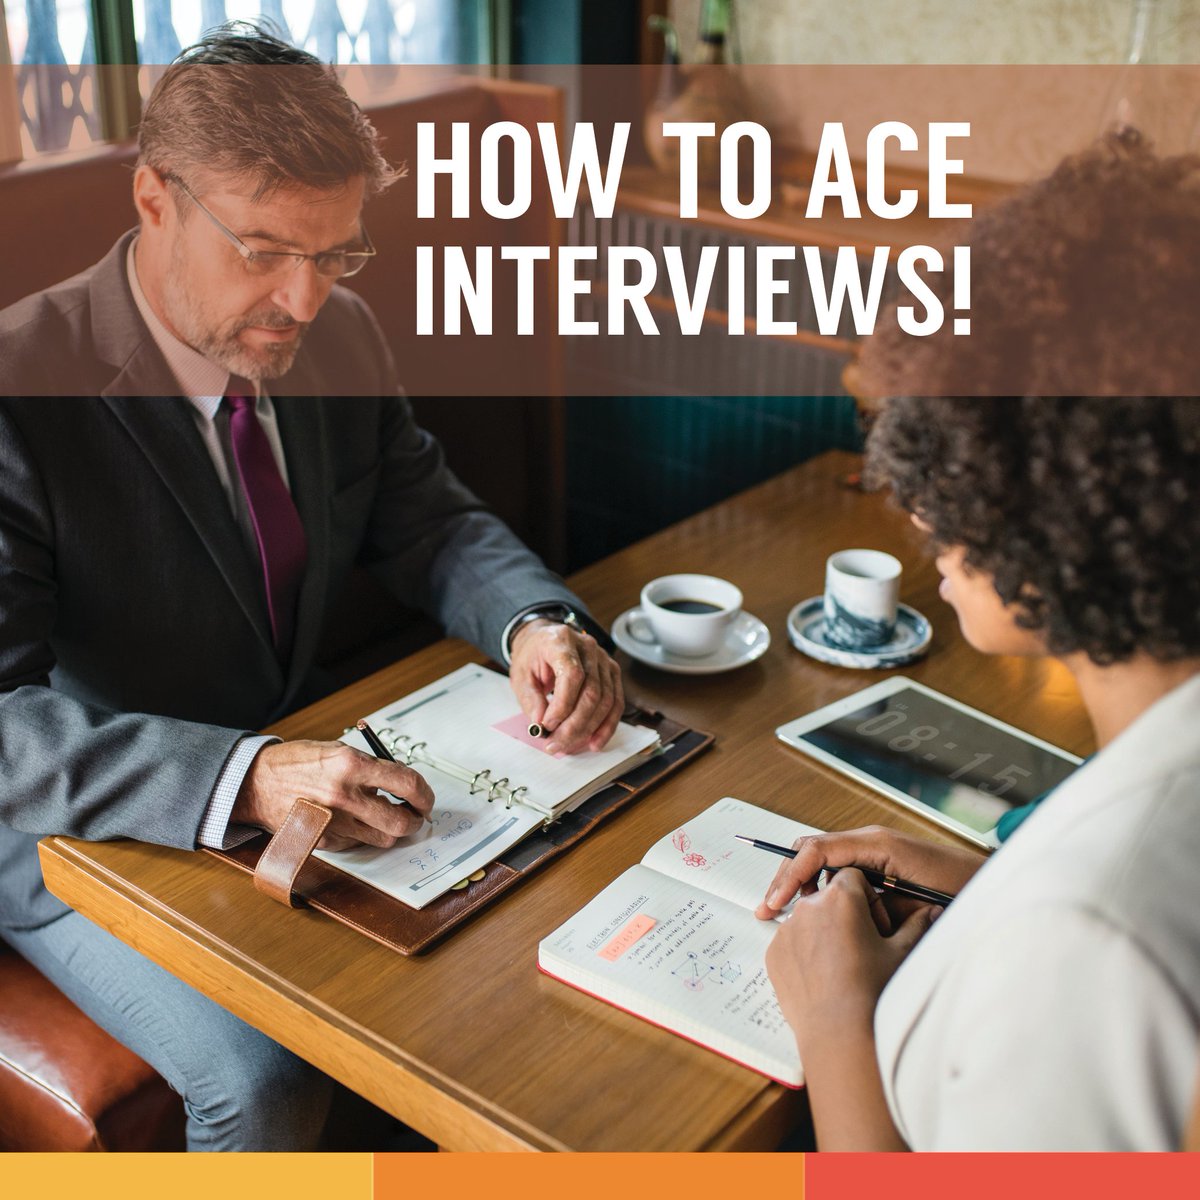 No matter how any interviews you’ve attended, they never become more fun. Check out The Legadima Guide to Acing Interviews. bit.ly/2w8cQCk
#spherionisheretohelp #back2thebasics #jobinterivew #interview #interviewtips #spherion #sarasota